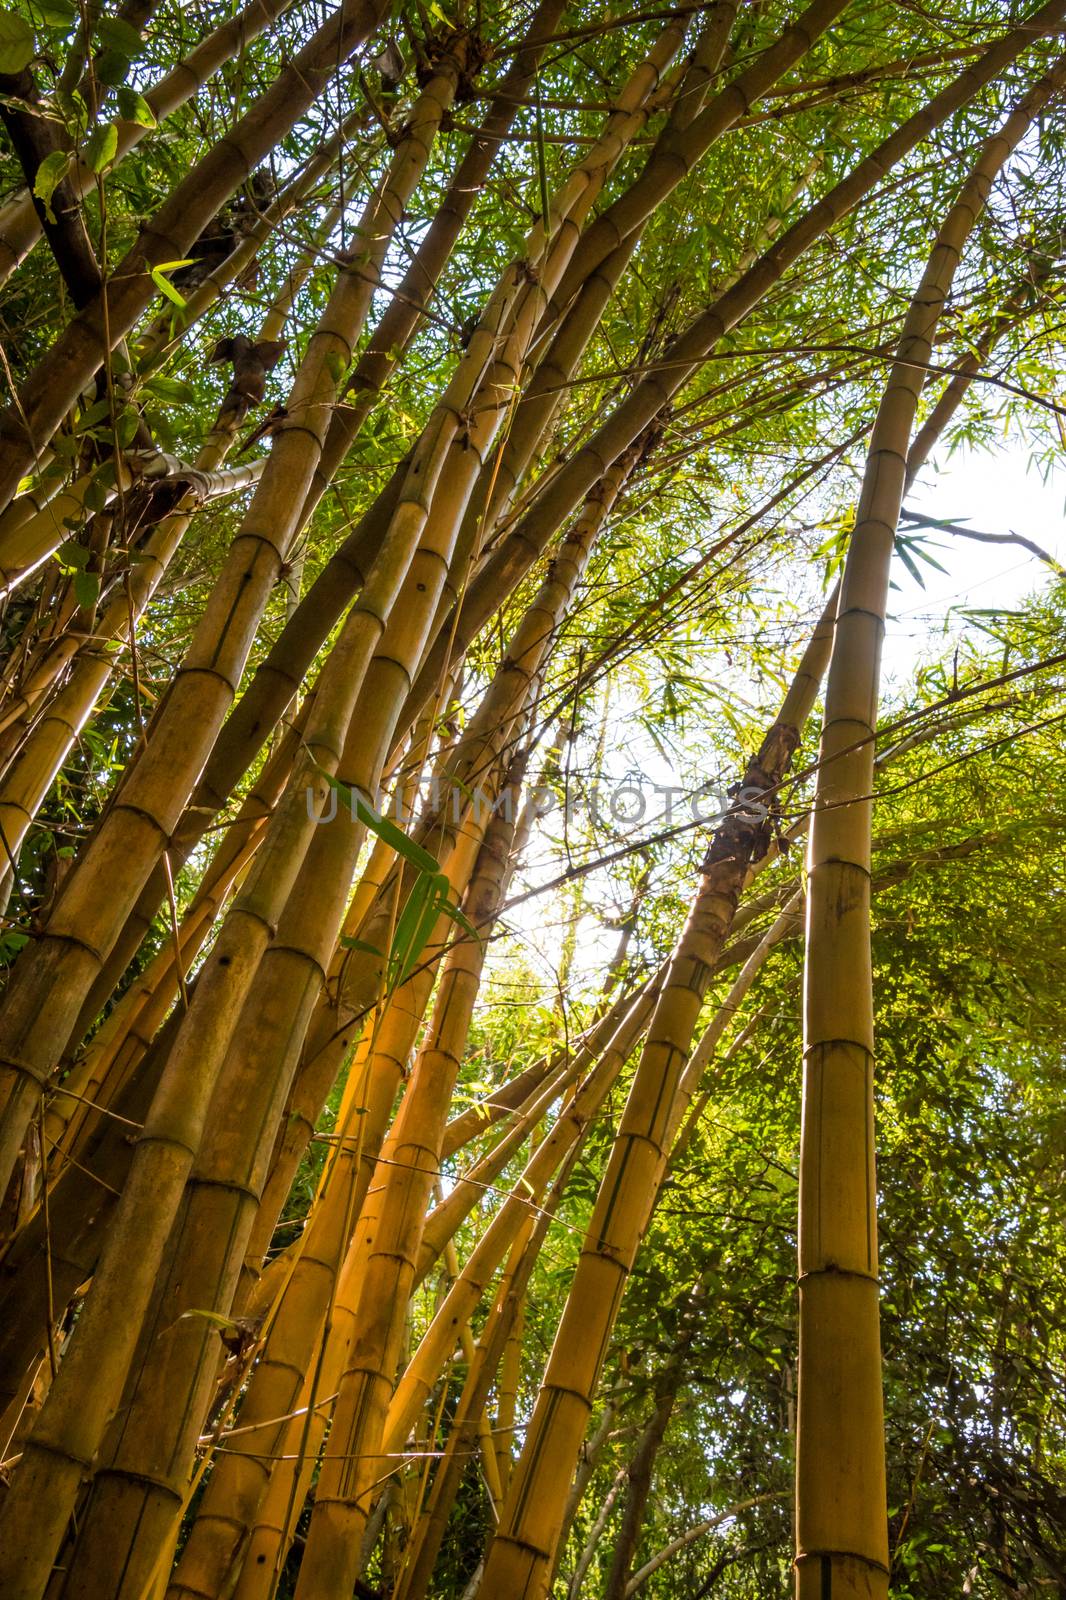 Standing under yellow giant bamboo in tropical jungle by MXW_Stock